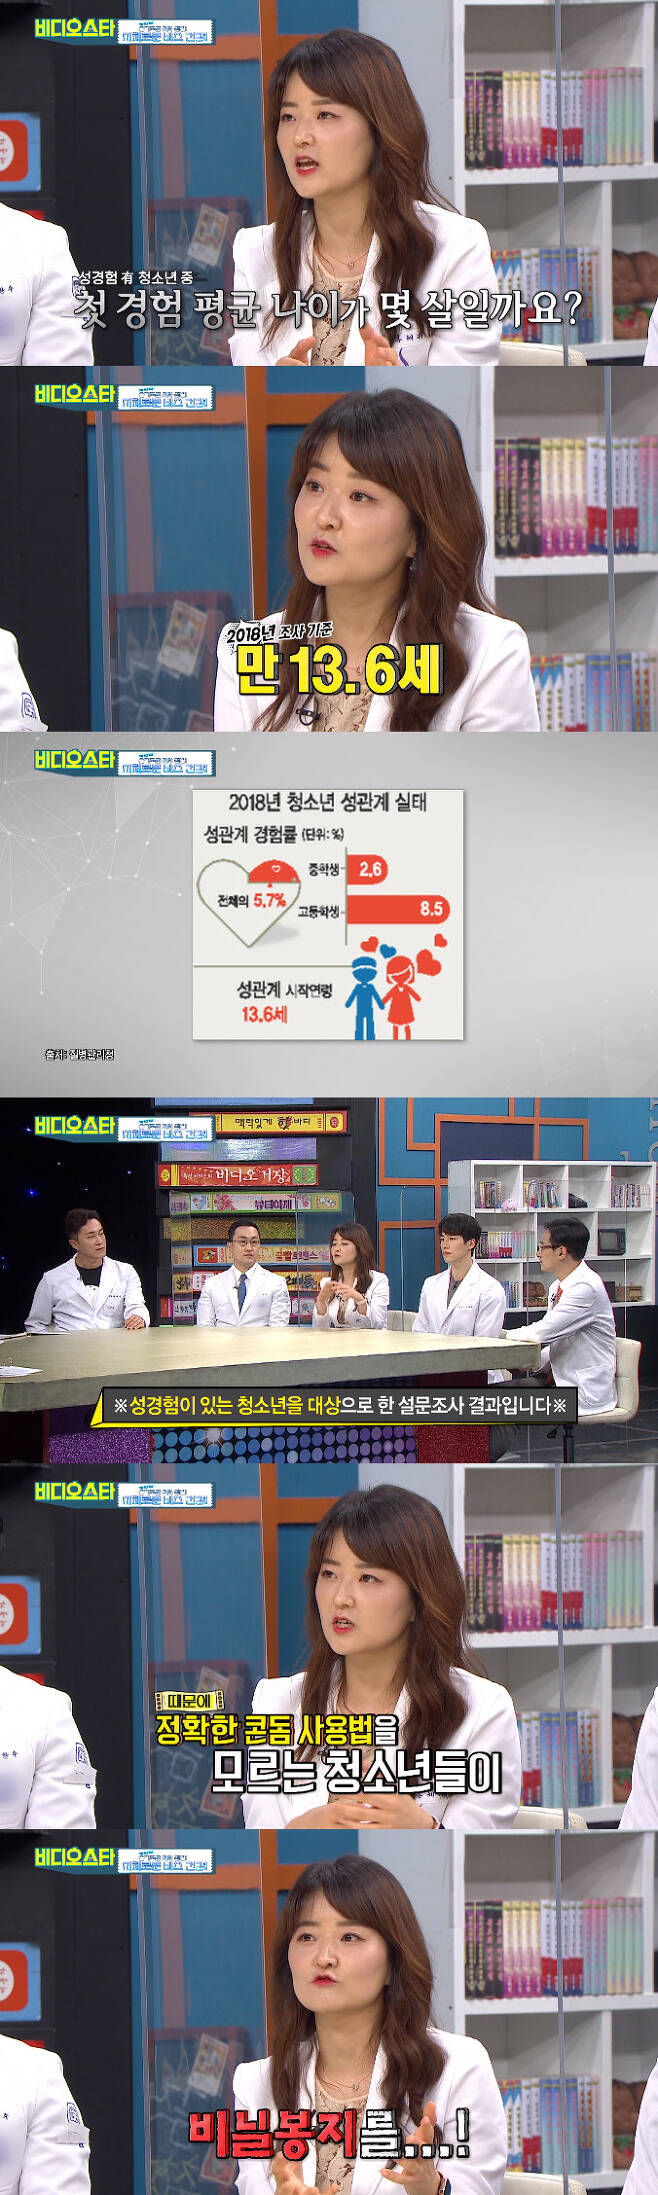 MBC Everlon Video Star broadcast on the 22nd was featured in the summer special feature Spicy Doctor Life! Wisdom Biss Health!The Ministry of Obstetrics and Gynecology Hong Hyeri, who runs the YouTube channel Our Local Obstetrics and Gynecology and reveals the information and sexual knowledge about womens diseases that women are curious about, emphasized the importance of Birth control during the holiday season.We also talked about the right Birth Control method to prevent unwanted pregnancy, misunderstanding and truth about the Birth Control drug.Hong Hyeri said, Birth control is the most important emphasis for patients in the summer season.If you go on vacation without preparing for pregnancy or Birth control, such events can open the hell door.The prescription rate for emergency Birth control drugs increases significantly in summer, including the end of the year, the World Cup and the Olympics as well as in summer.I get the most during summer vacations and Christmas, he said.The most recommended type of Bird control was Condom. Hong Hyeri said, Condom should not be one of the Bird control instruments.Condom is essential and you have to think of adding one more.The types of Bird control include the Bird Control Drug, the Hormonal Birth Control Device, and the Bird Control Device, which is called Implanon.There are various Birth control methods, so it is important to find the best Birth control method for you. He added that taking the Birth Control drug for 3 to 5 years can reduce ovarian cancer or endometrial cancer by more than 50% and that taking it in the long term does not affect pregnancy.The first experience of the South Korean national football team with sexual experience is said to be 13.6 years old, and it was shocking to find out the actual condition of the sexual relationship of the South Korean national football team.Hong Hyeri said: Its not the average of all South Korea national football teams.It is the first sexual age of South Korea national football teams with sexual experience.In other countries, education is also diverse in elementary and junior high schools. In Korea, you would have seen the news.I tried to teach you how to use Condom, but the articles that received complaints from parents are looking uncomfortable. There are a lot of shocking cases, he said. I do not know how to use Condom, I do not know how to use it, I do not know how to use it, and it is difficult to buy it.Hong Hyeri said, Many women ask their boyfriend to wear a Condom, and they say, I can not talk because this friend is going to break up with me. Even when I am an adult, I often do not recognize the importance of using the right Condom.Condom is worn for the health of both men and women.We have to remember that men are not wearing it for women, he said. The most important way to wear Condom straight is to wear it from beginning to end.